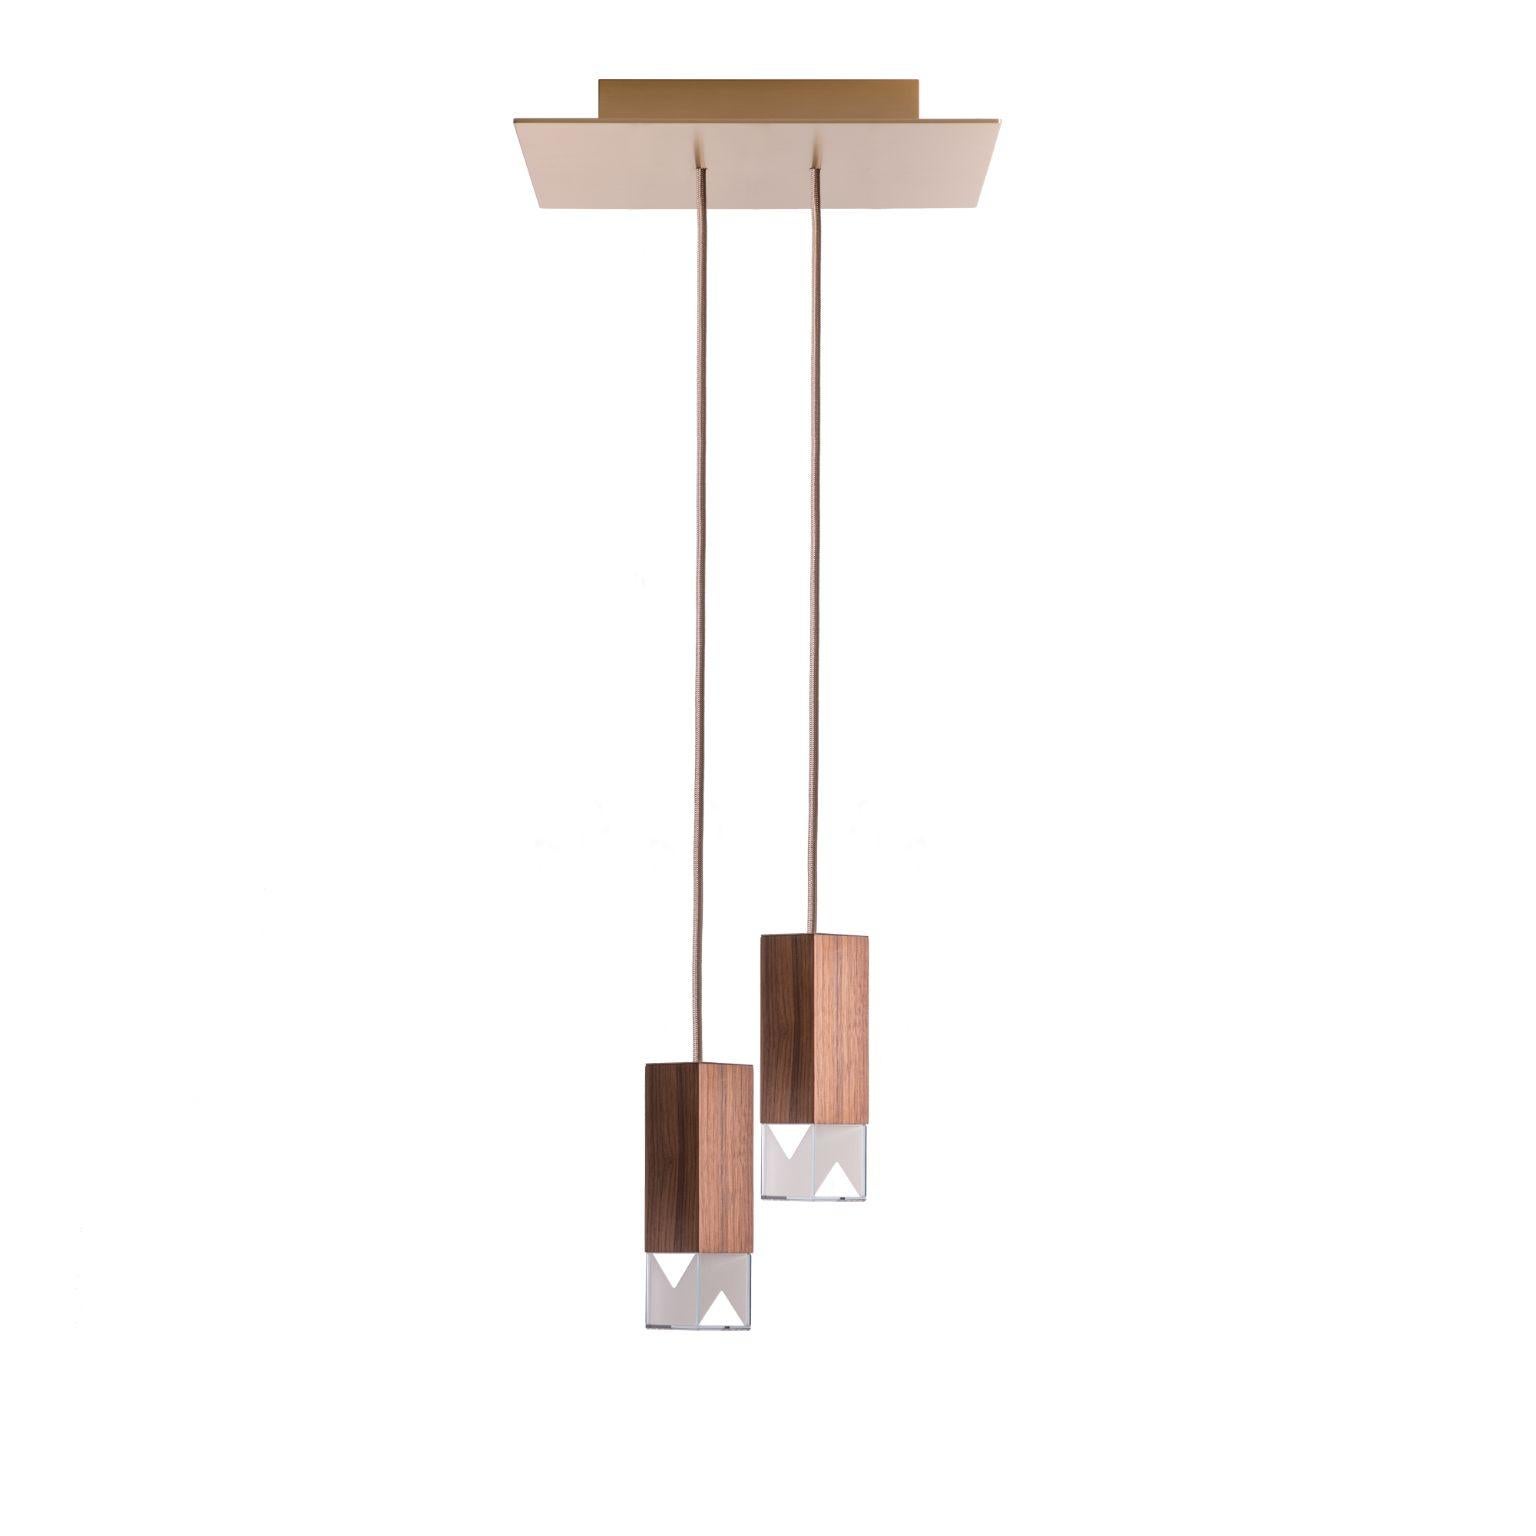 Lamp One Wood Duet Chandelier by Formaminima
Dimensions: D30 x W30 x H 68 cm (adjustable height, please contact us).
Materials: Body lamps: handcrafted solid Canaletto walnut wood, matt oil finish
Crystal diffusers, Limoges biscuit-finish porcelain